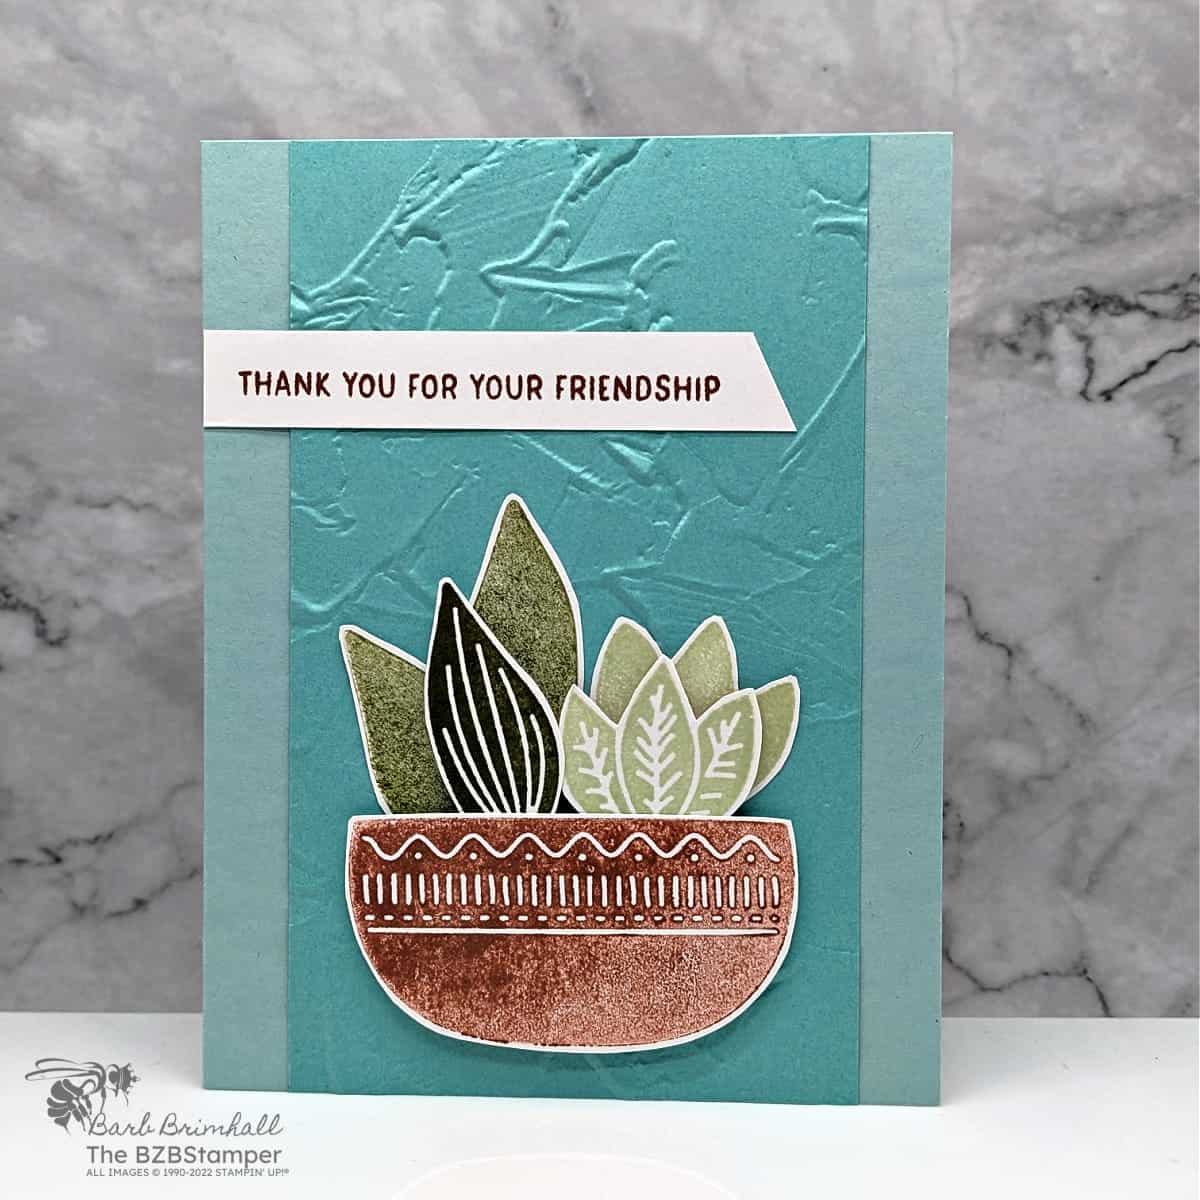 Thank You Card using the Planted Paradise Stamp Set featuring a pot with leaves in it in blues, browns and greens and a "thank you for your friendship" sentiment.